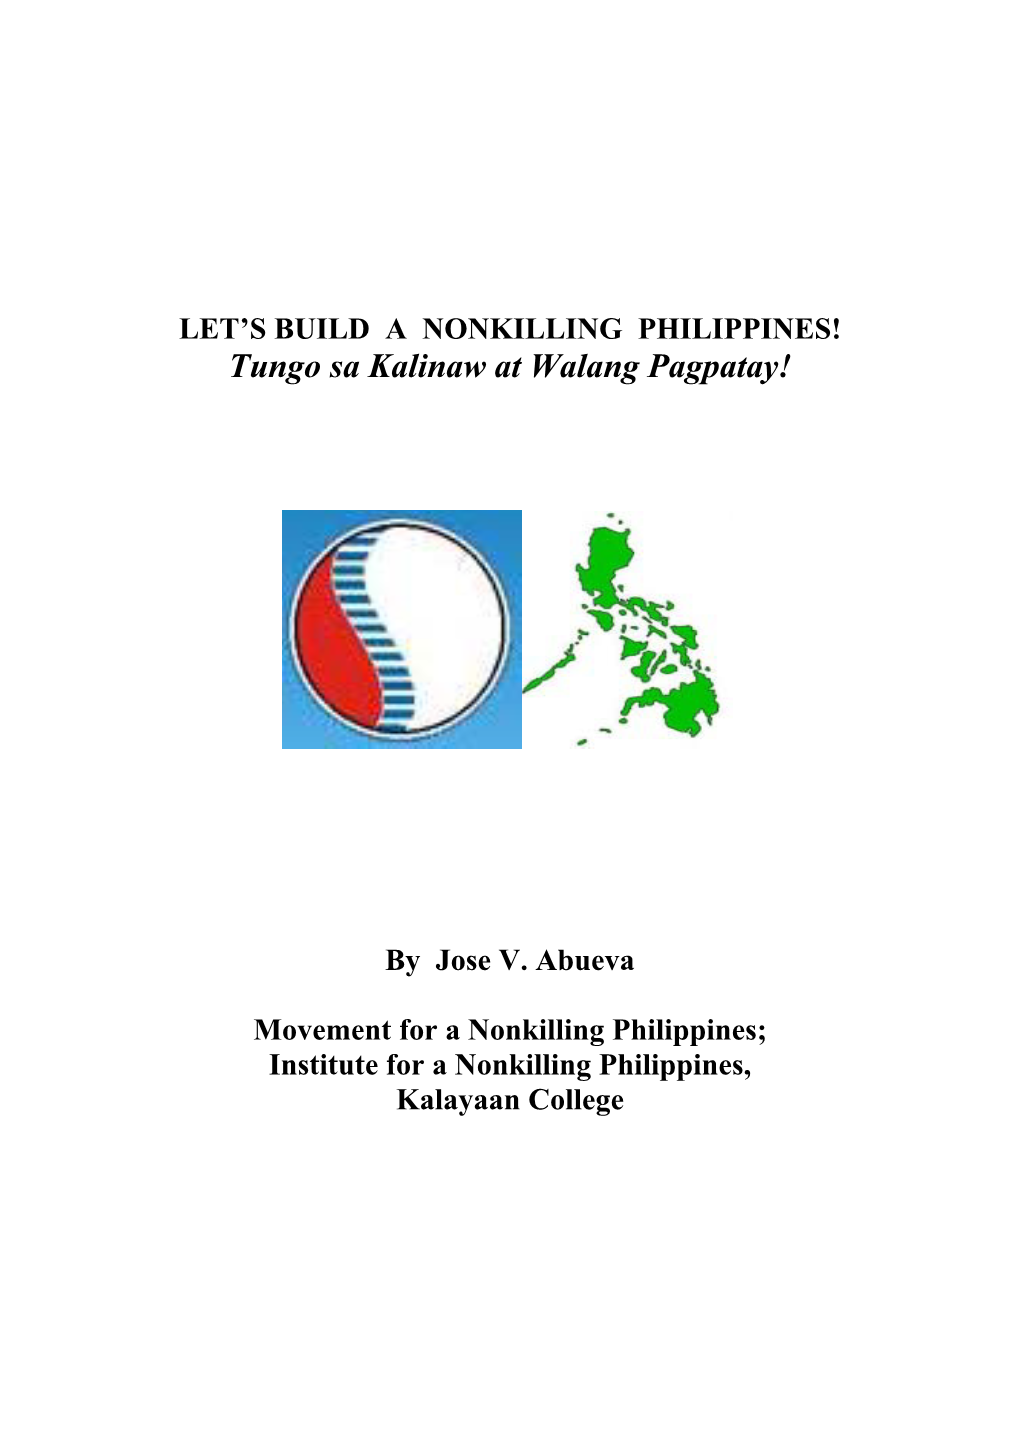 Building a Nonkilling Philippines: a Call to Action in Metro Manila on 22 September 2010;